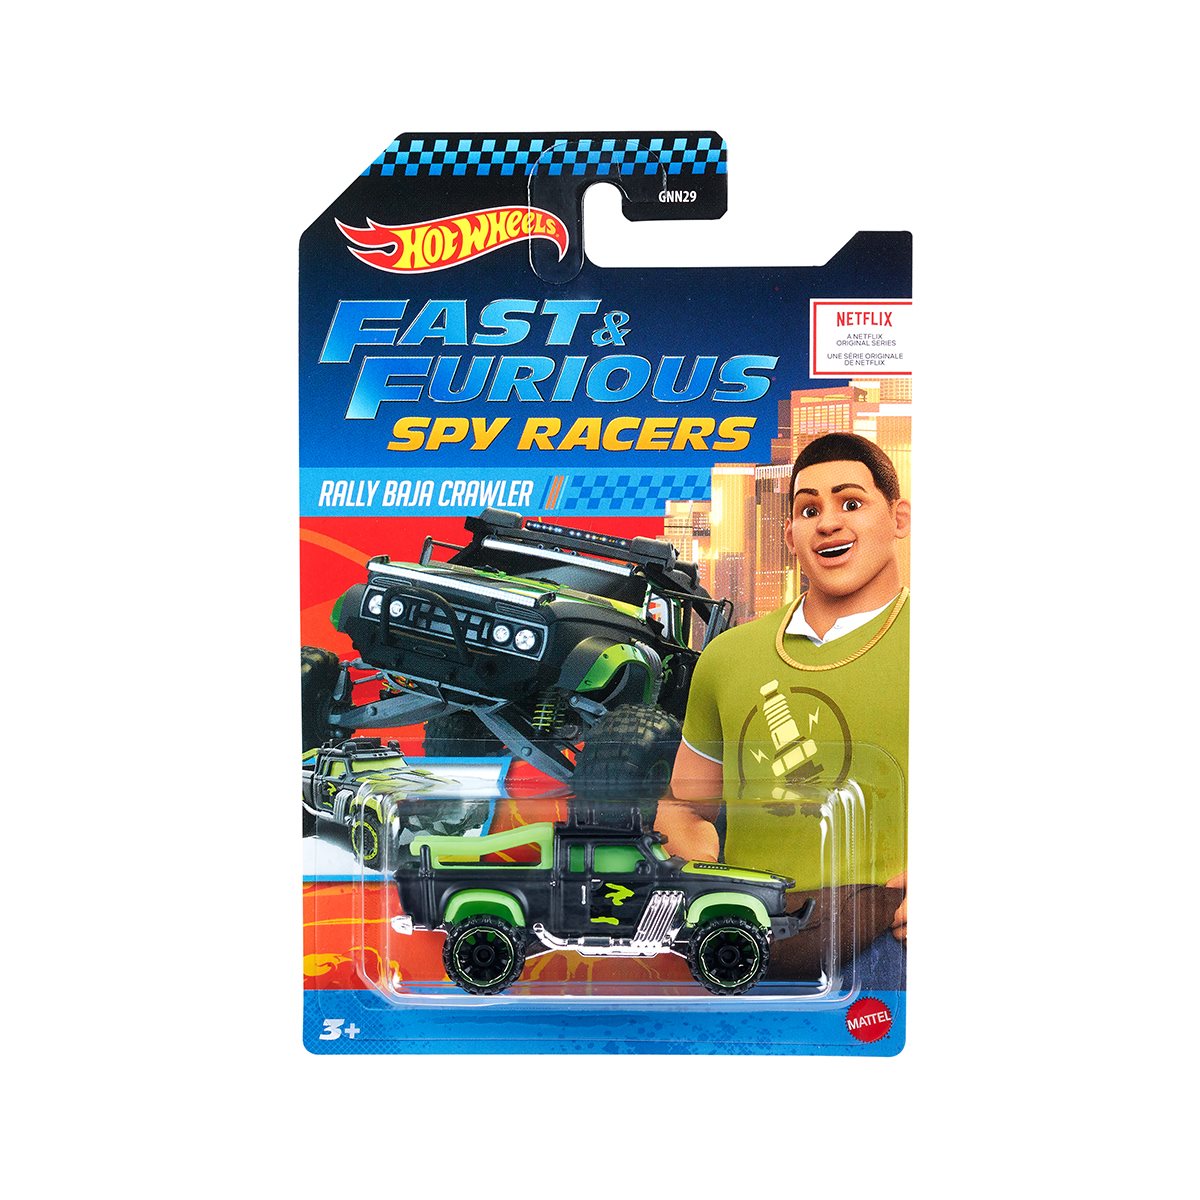 Fast & Furious Spy Racers Hot Wheels Mix 1 2020 Vehicle Case.